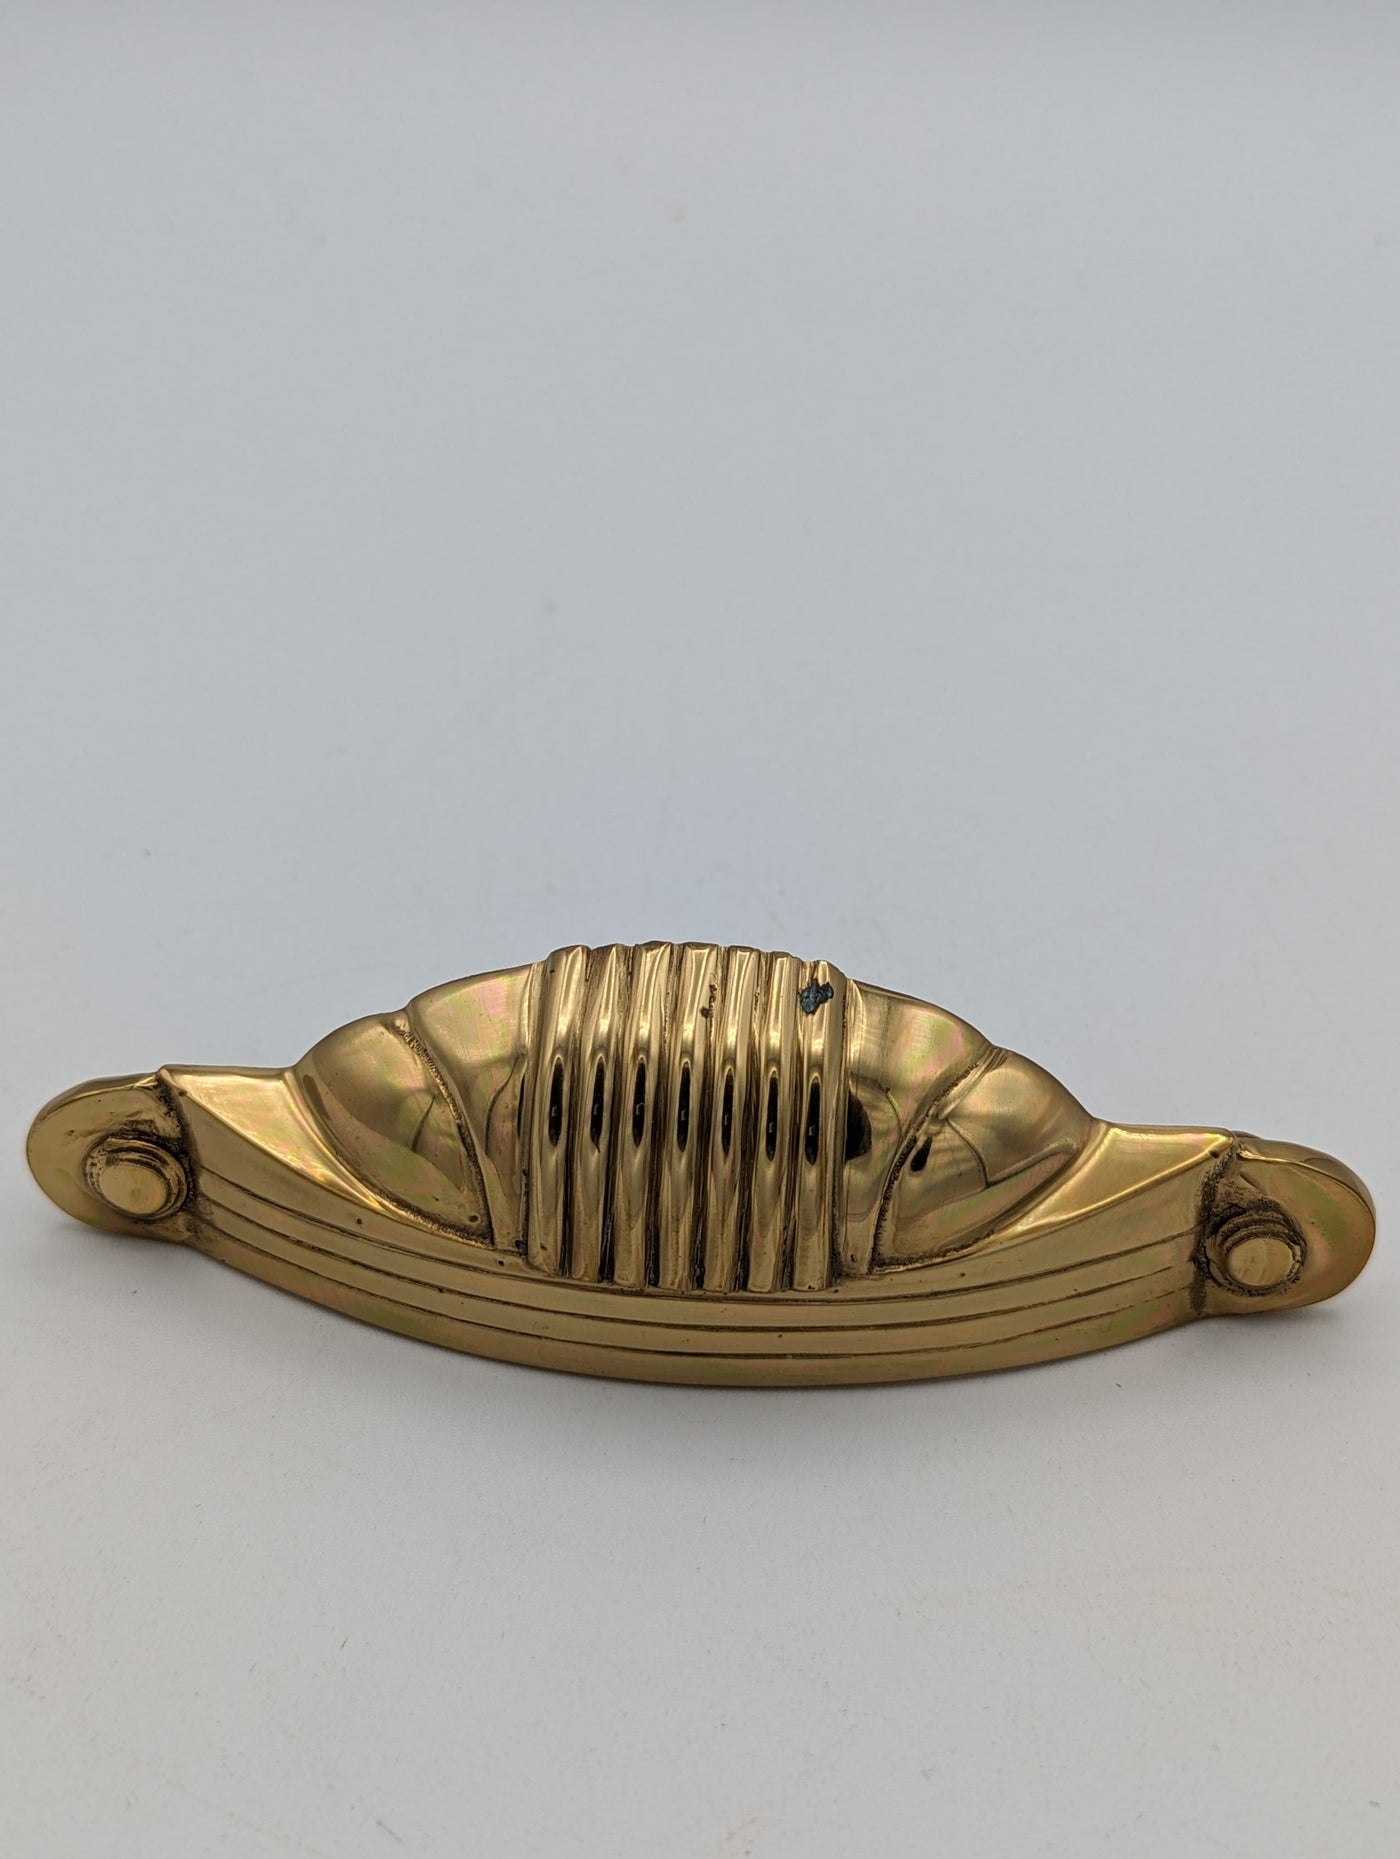 Open Box Sale Item 5 Inch Overall (4 Inch c-c) Solid Brass Marquee Pull (Polished Brass Finish)